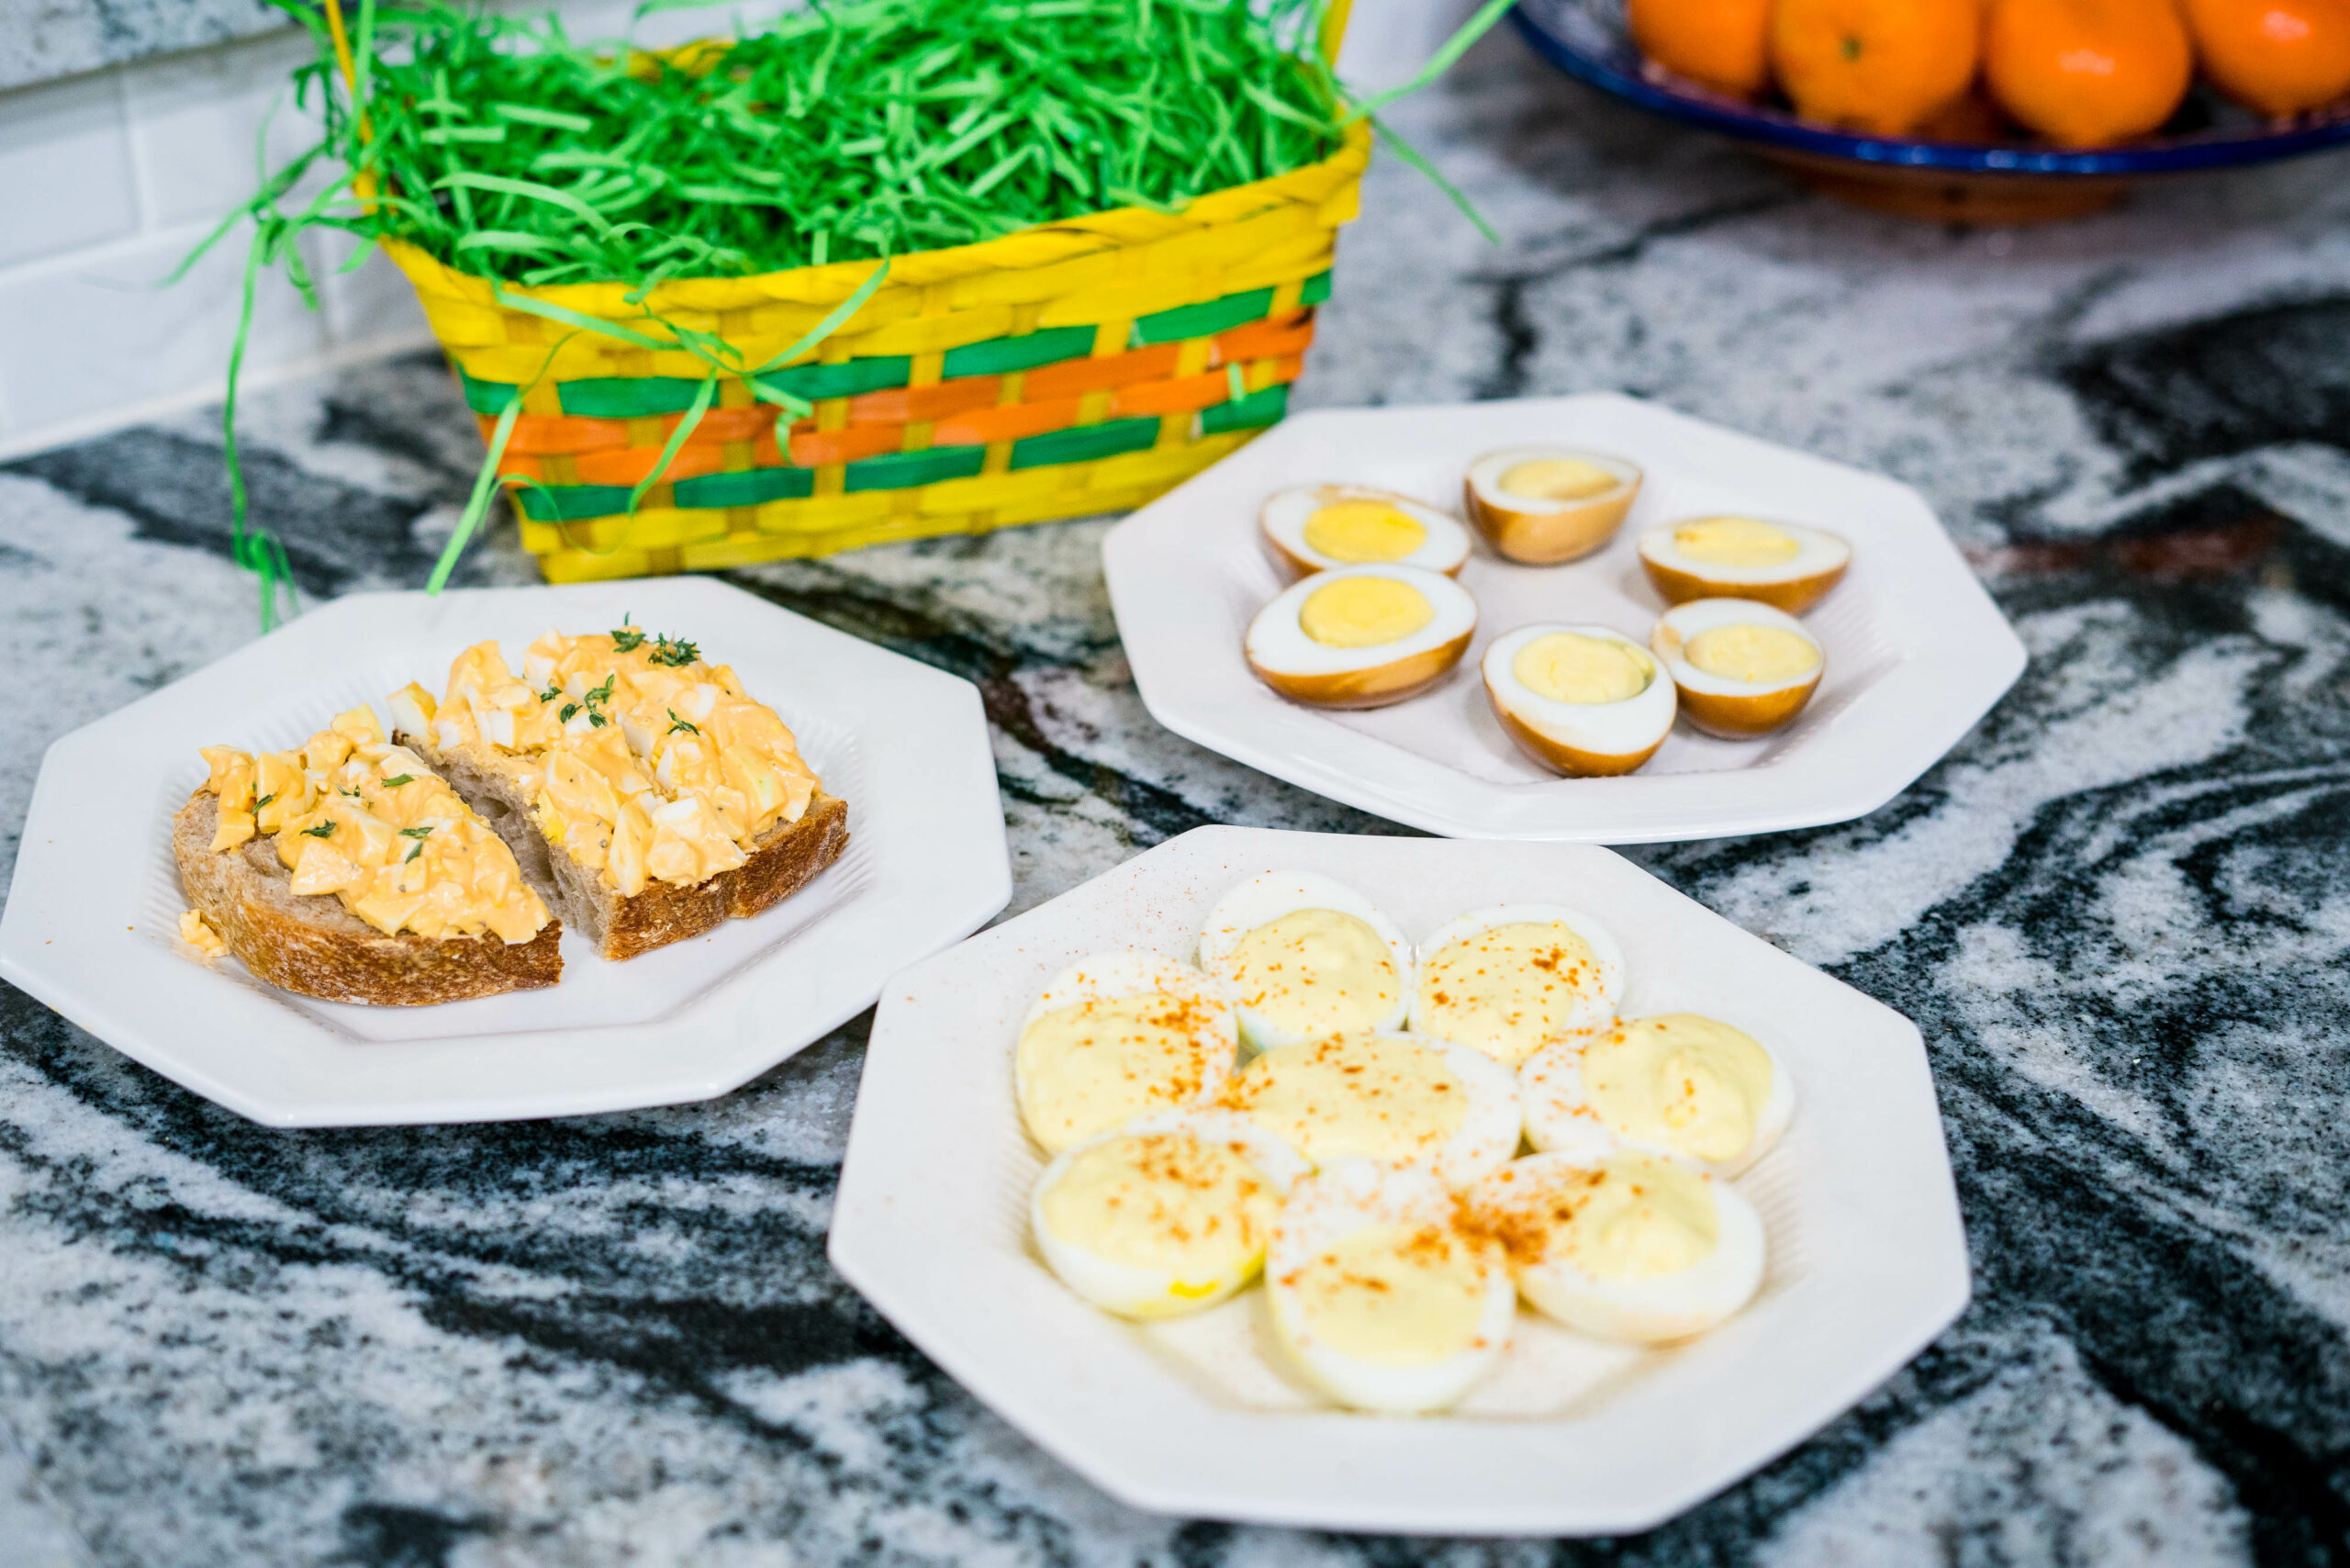 boiled eggs prepared 3 ways - deviled, egg salad, and soy sauce eggs